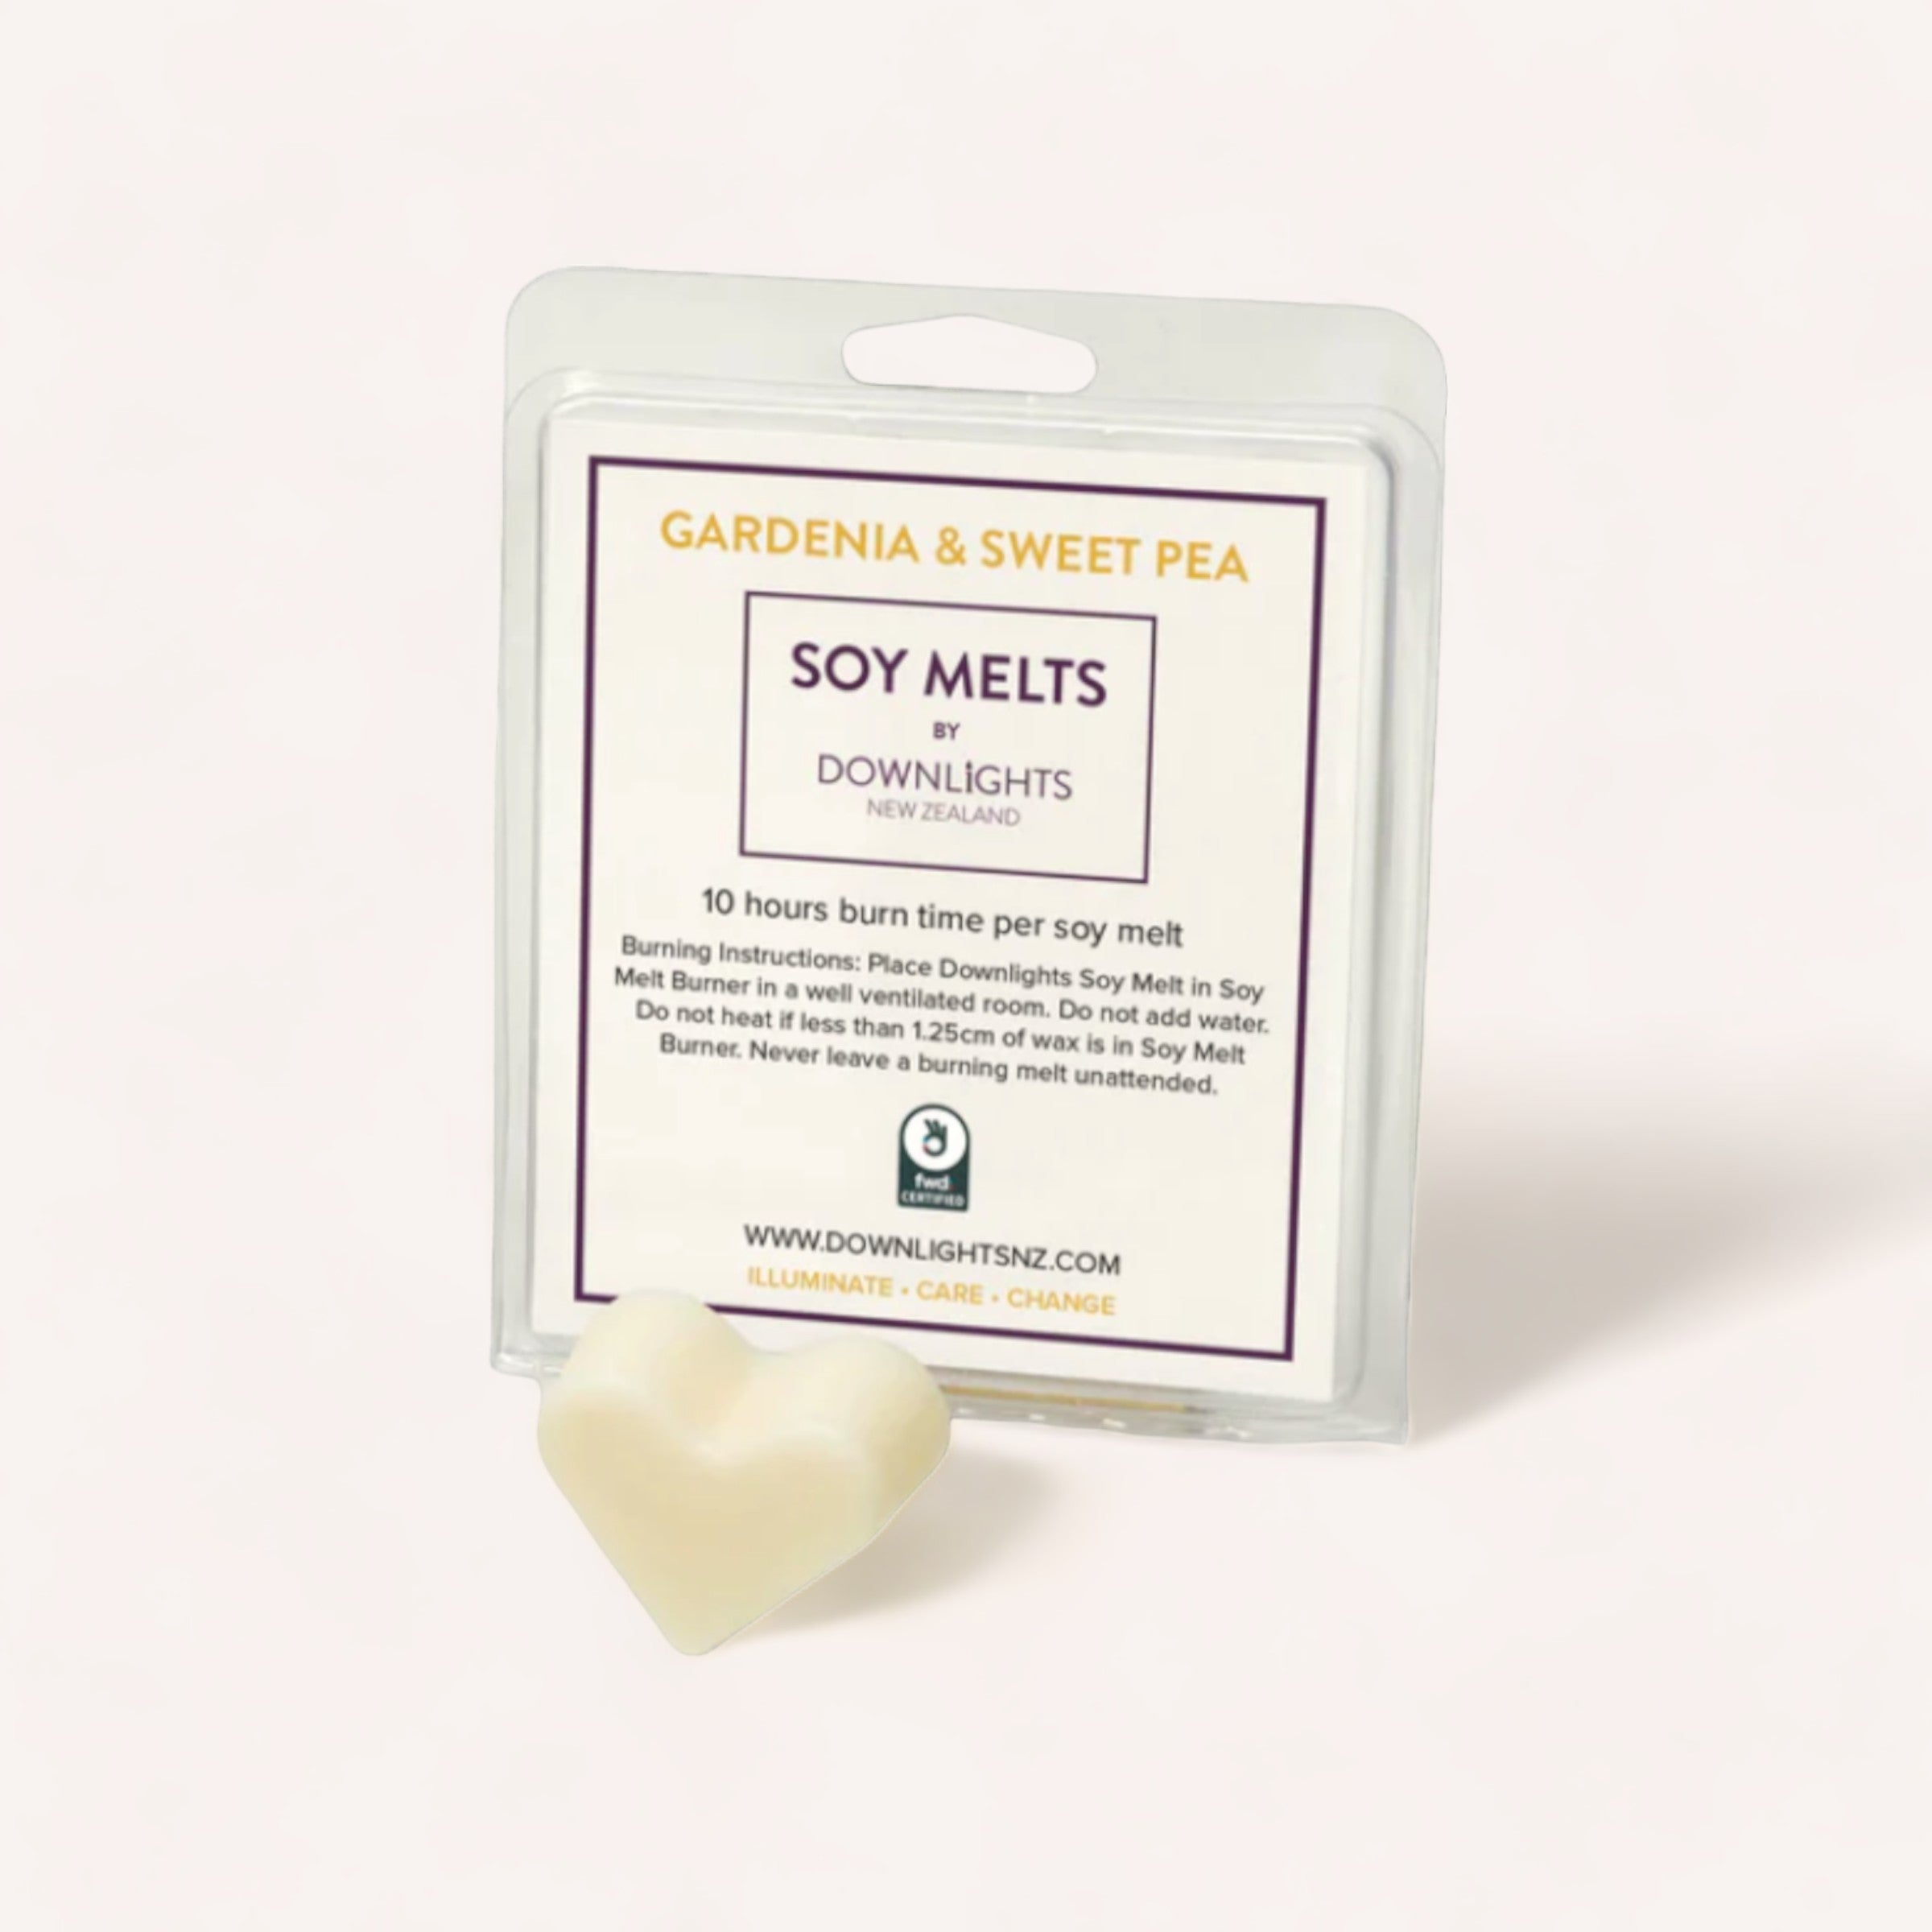 A pack of Gardenia & Sweet Pea Heart Soy Melts by Downlights, with a heart-shaped soy melt in front of it.